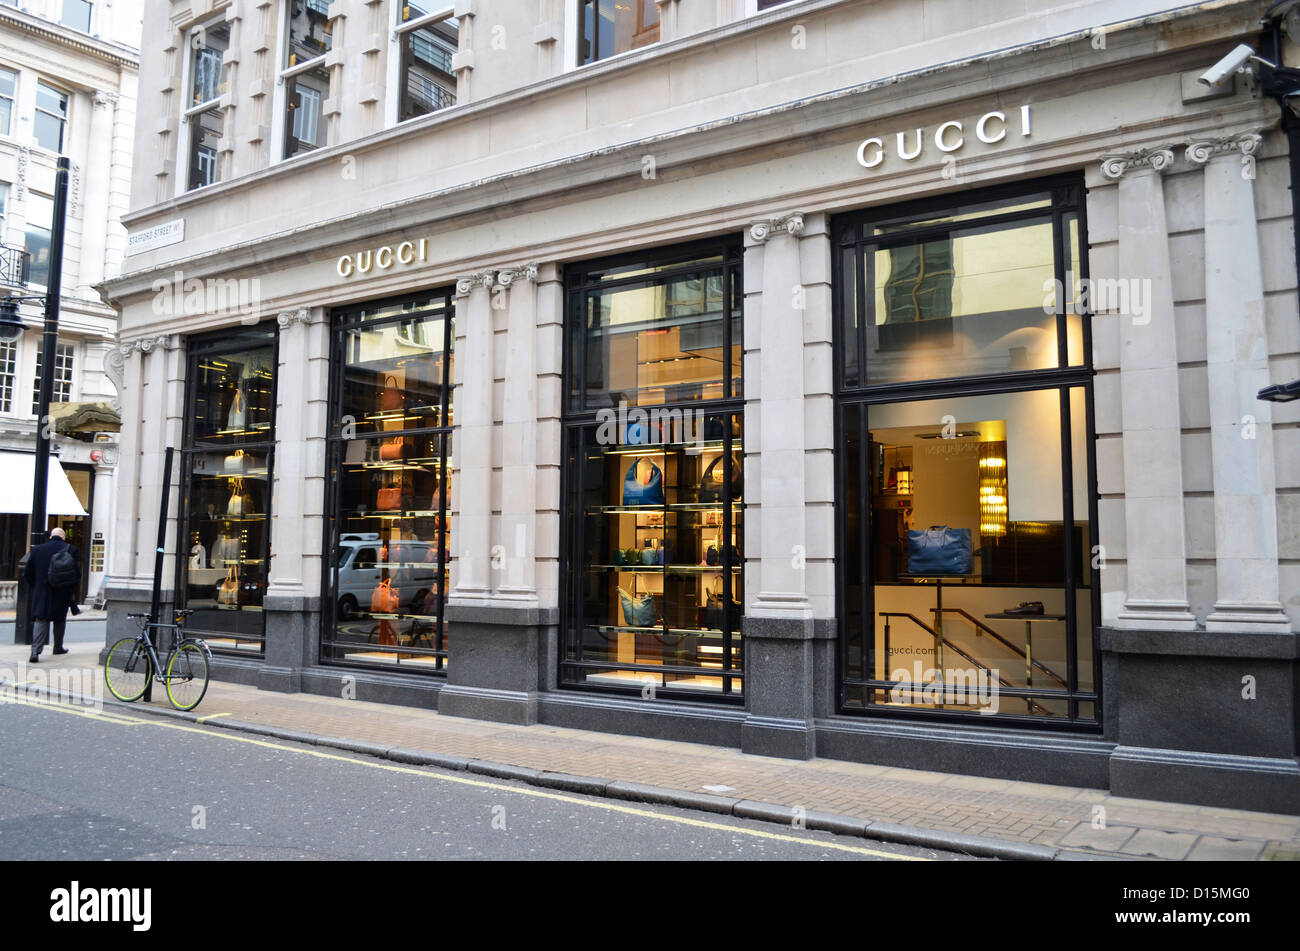 gucci outlet london